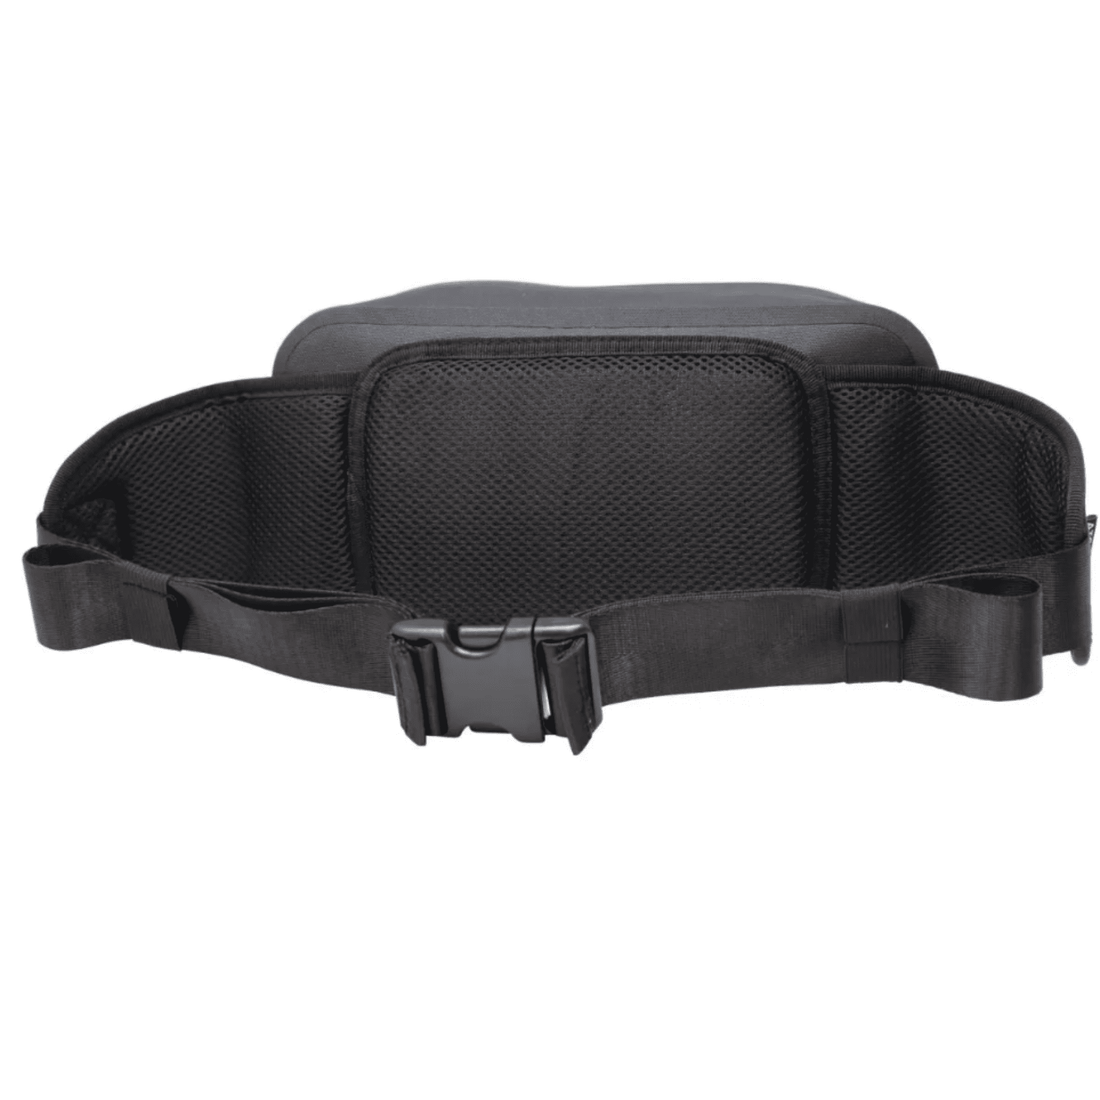 Atoll Atoll Overkill Dry Bag Waist Pouch Fanny Pack